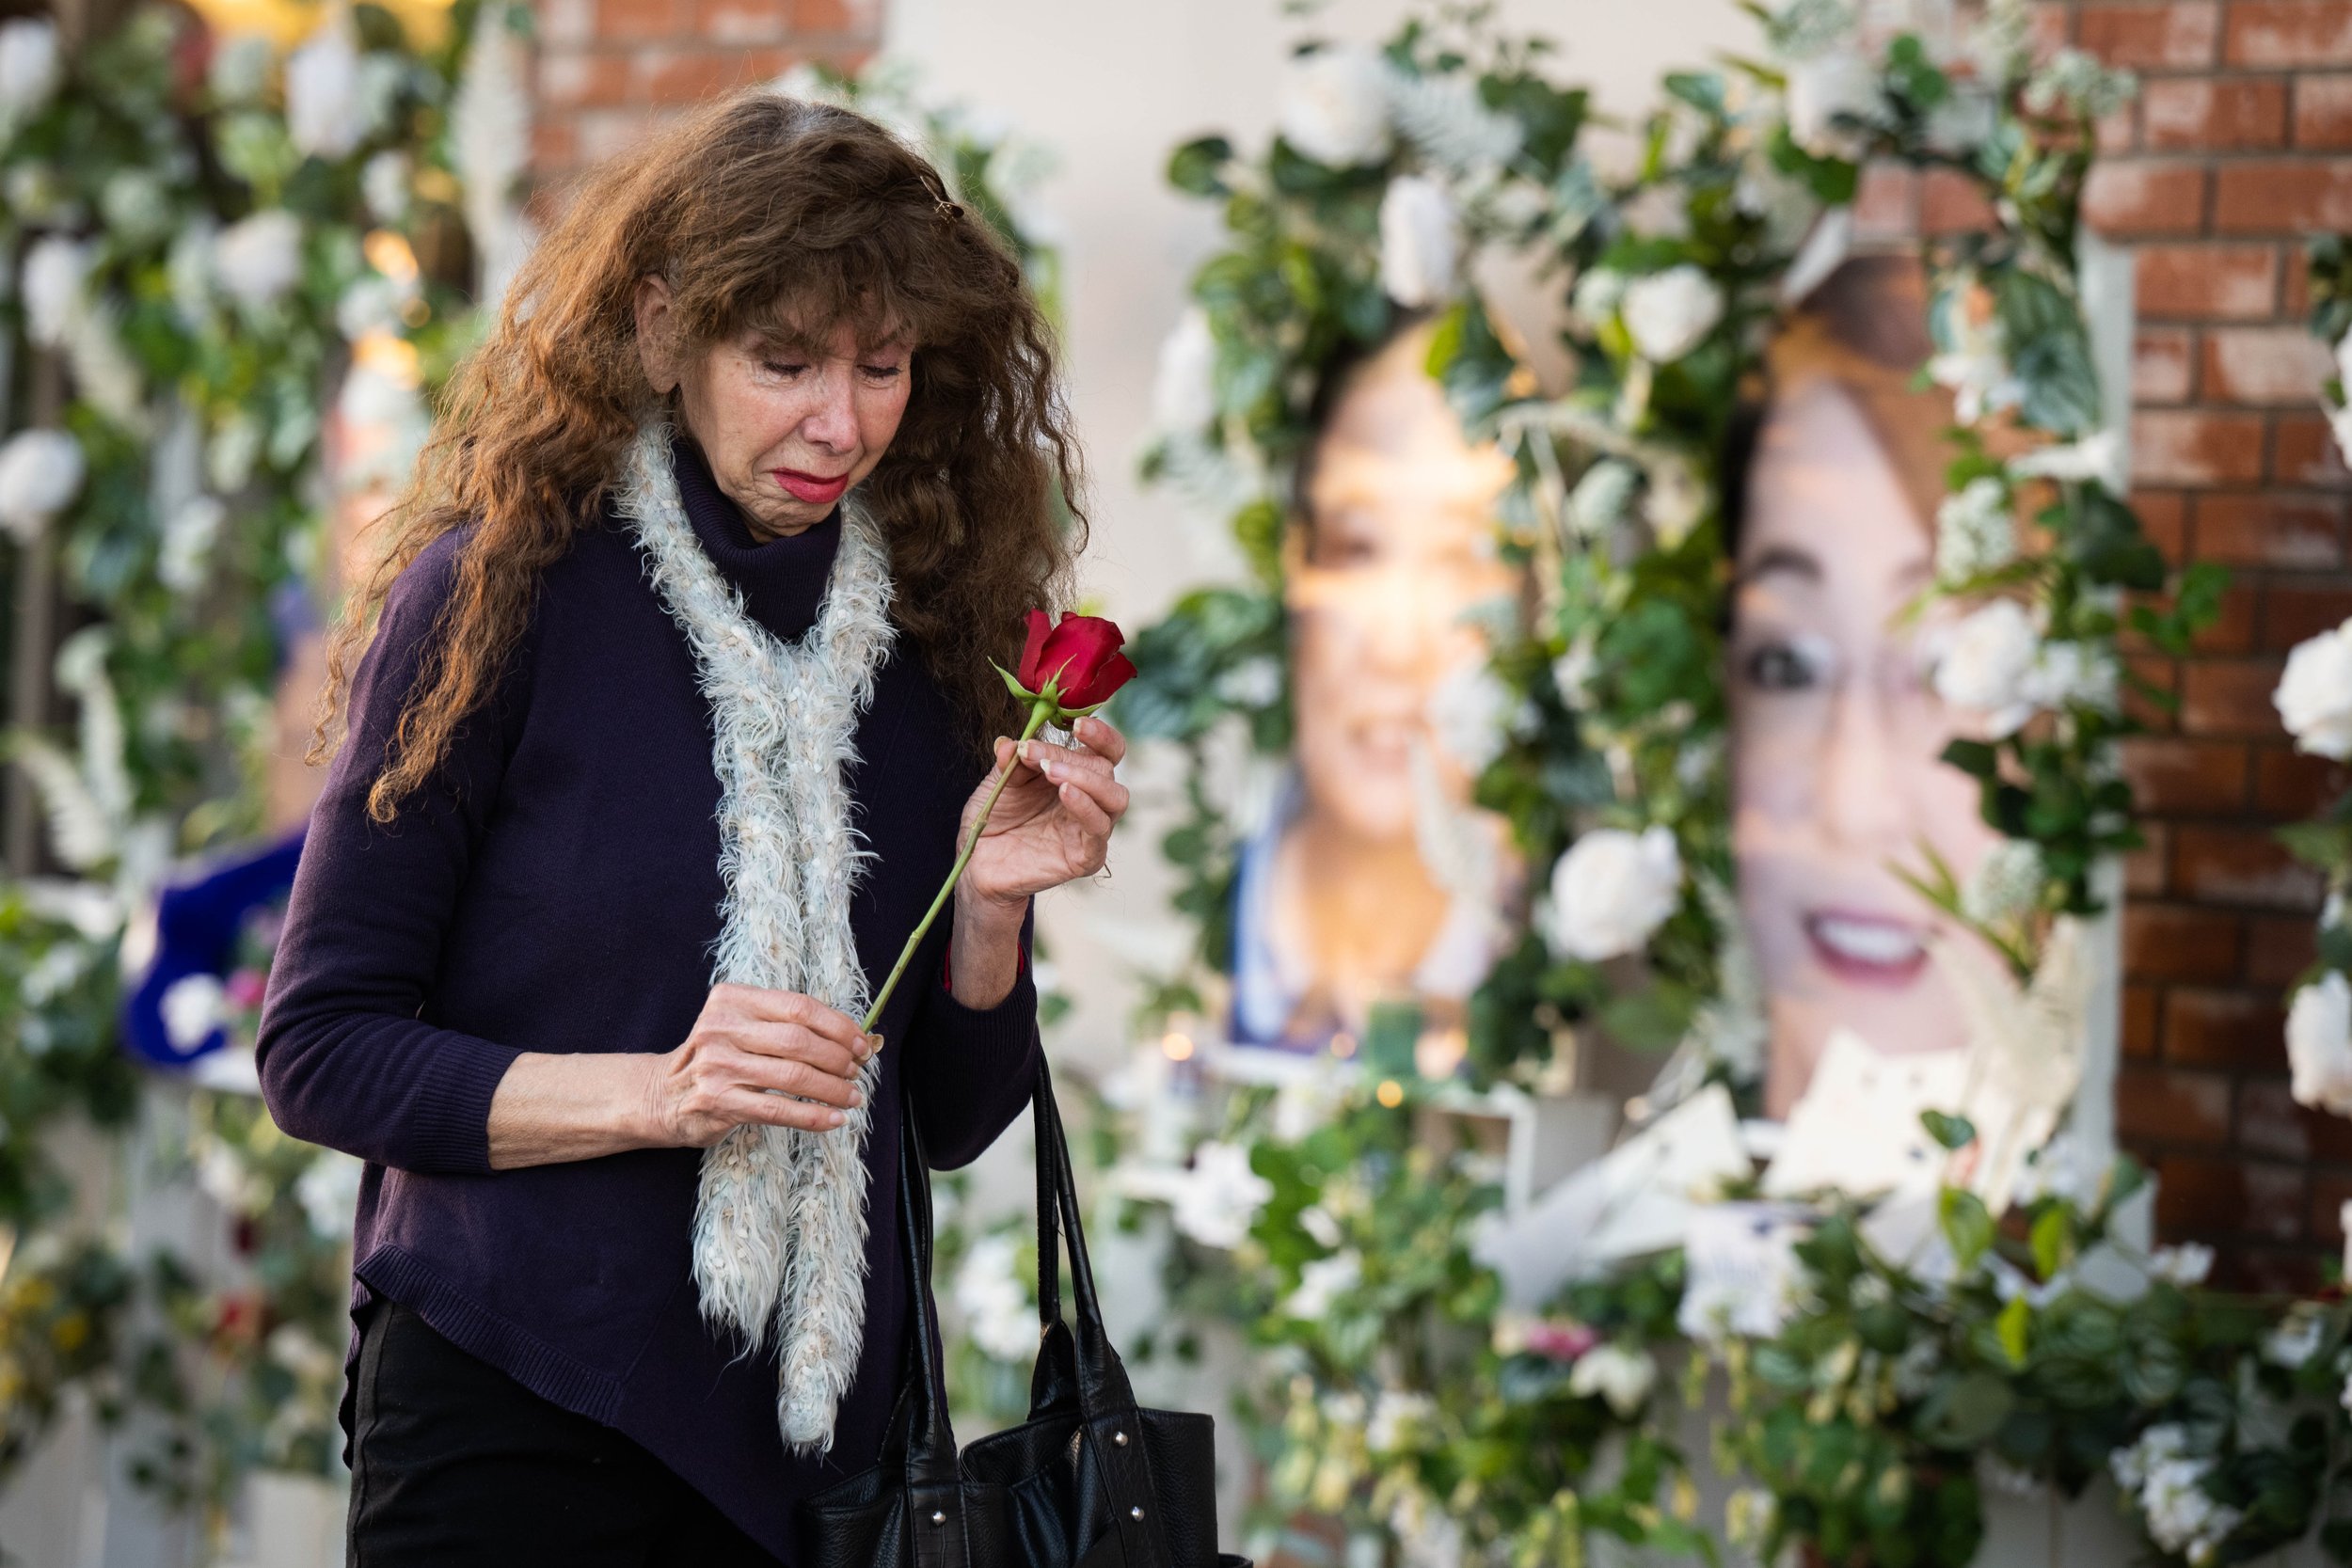  Dancer Adelle Castro, 68, of Temple City, left, visits on Thursday, January 26, 2023 the memorial for the victims of the Monterey Park mass shooting at Star Ballroom Dance Studio where 11 of her friends were killed. “They were my family for 30 years